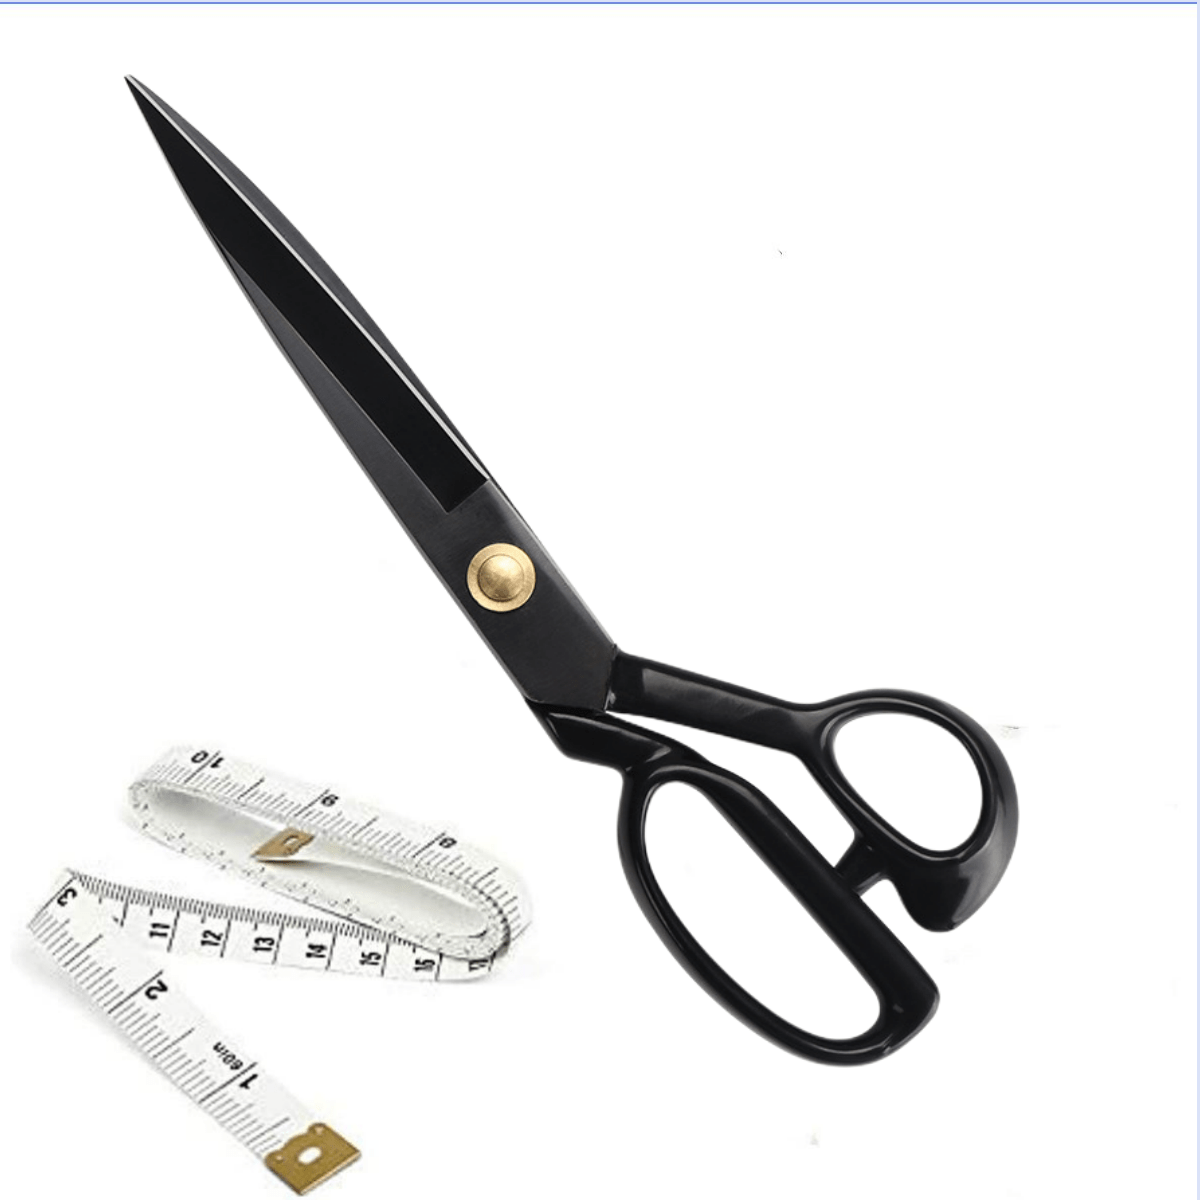 Large Stainless Steel Household Scissors, Long-mouthed Curved Mouth and  Foot Scissors, Bandage Gauze Scissors, Fabric Lace Serrated Scissors